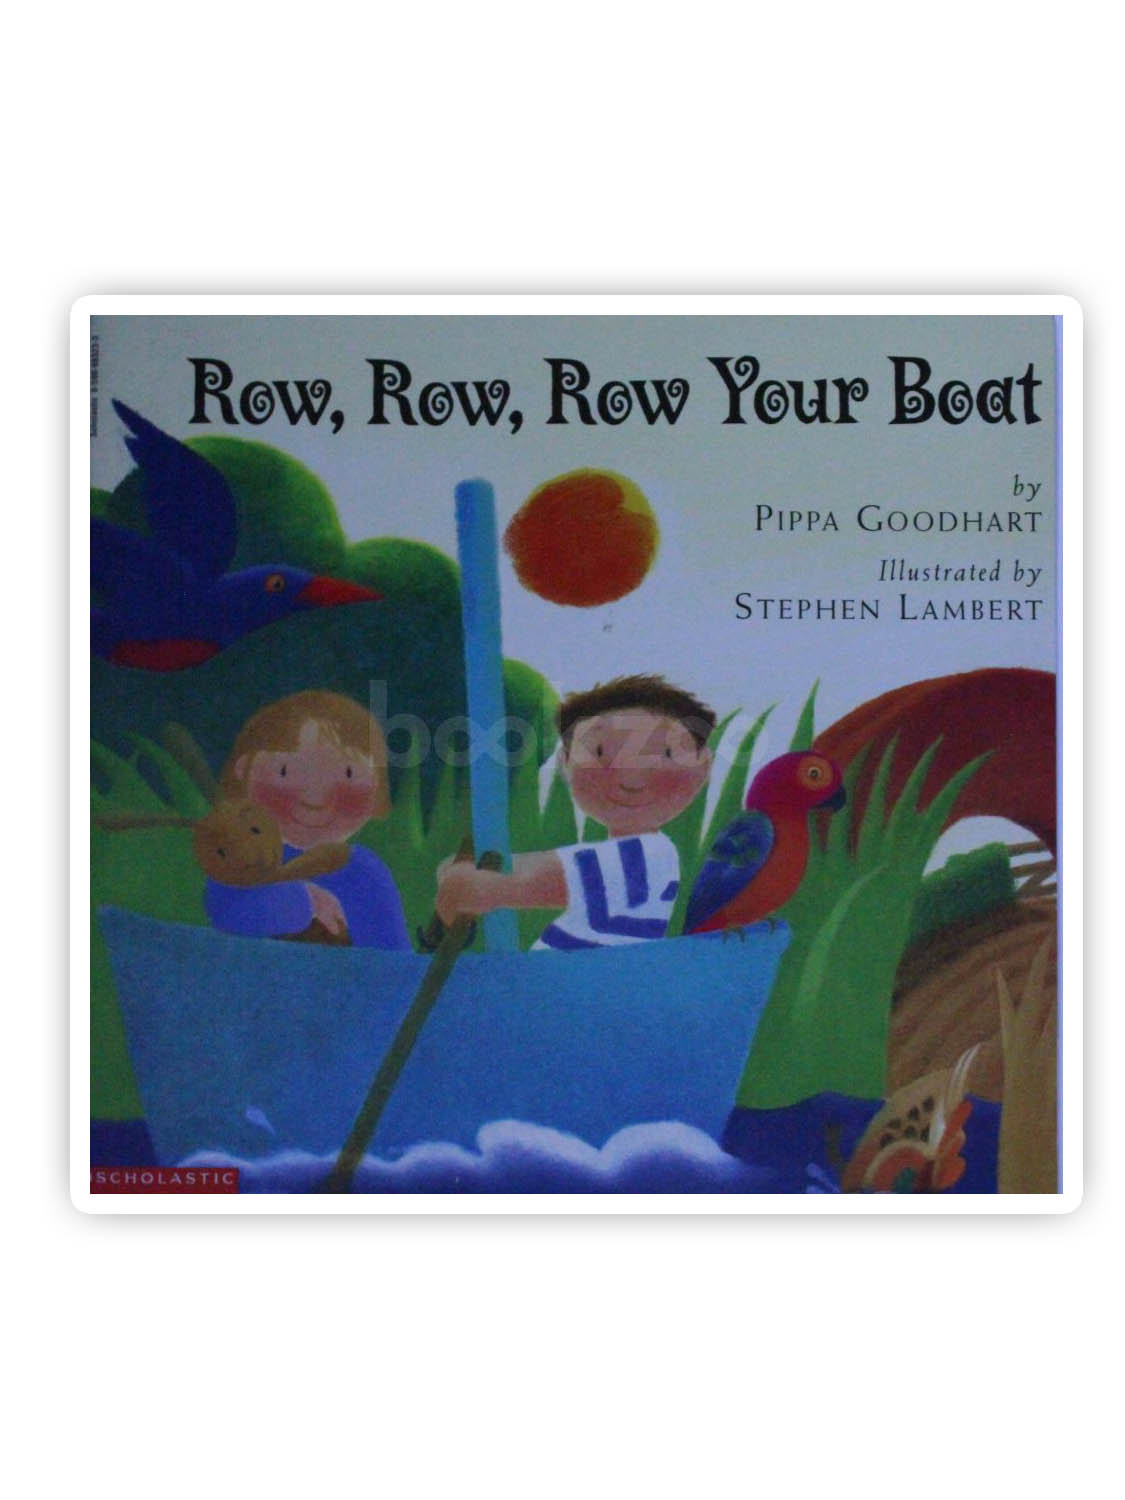 Row　Boat　by　Pippa　bookstore　Goodhart　at　Online　—　Buy　Your